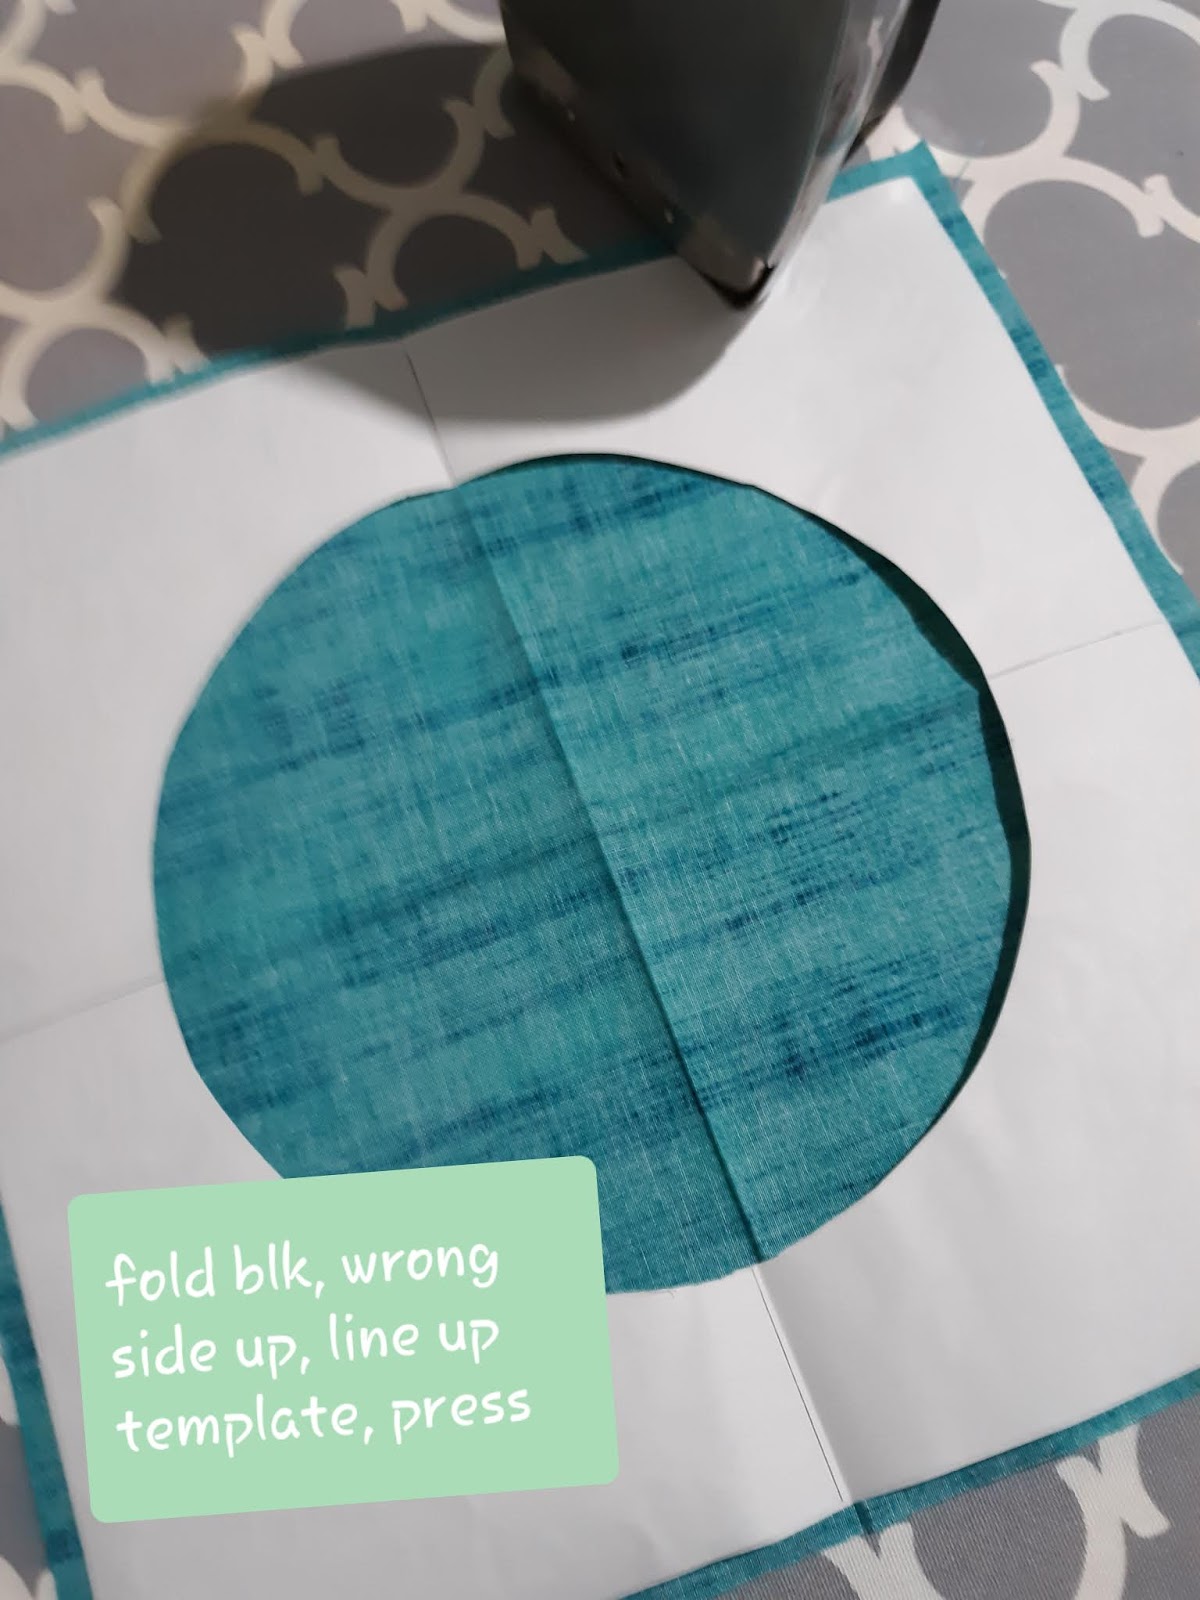 Embroidery Basics: How to Use Paper Templates for Marking Designs - WeAllSew